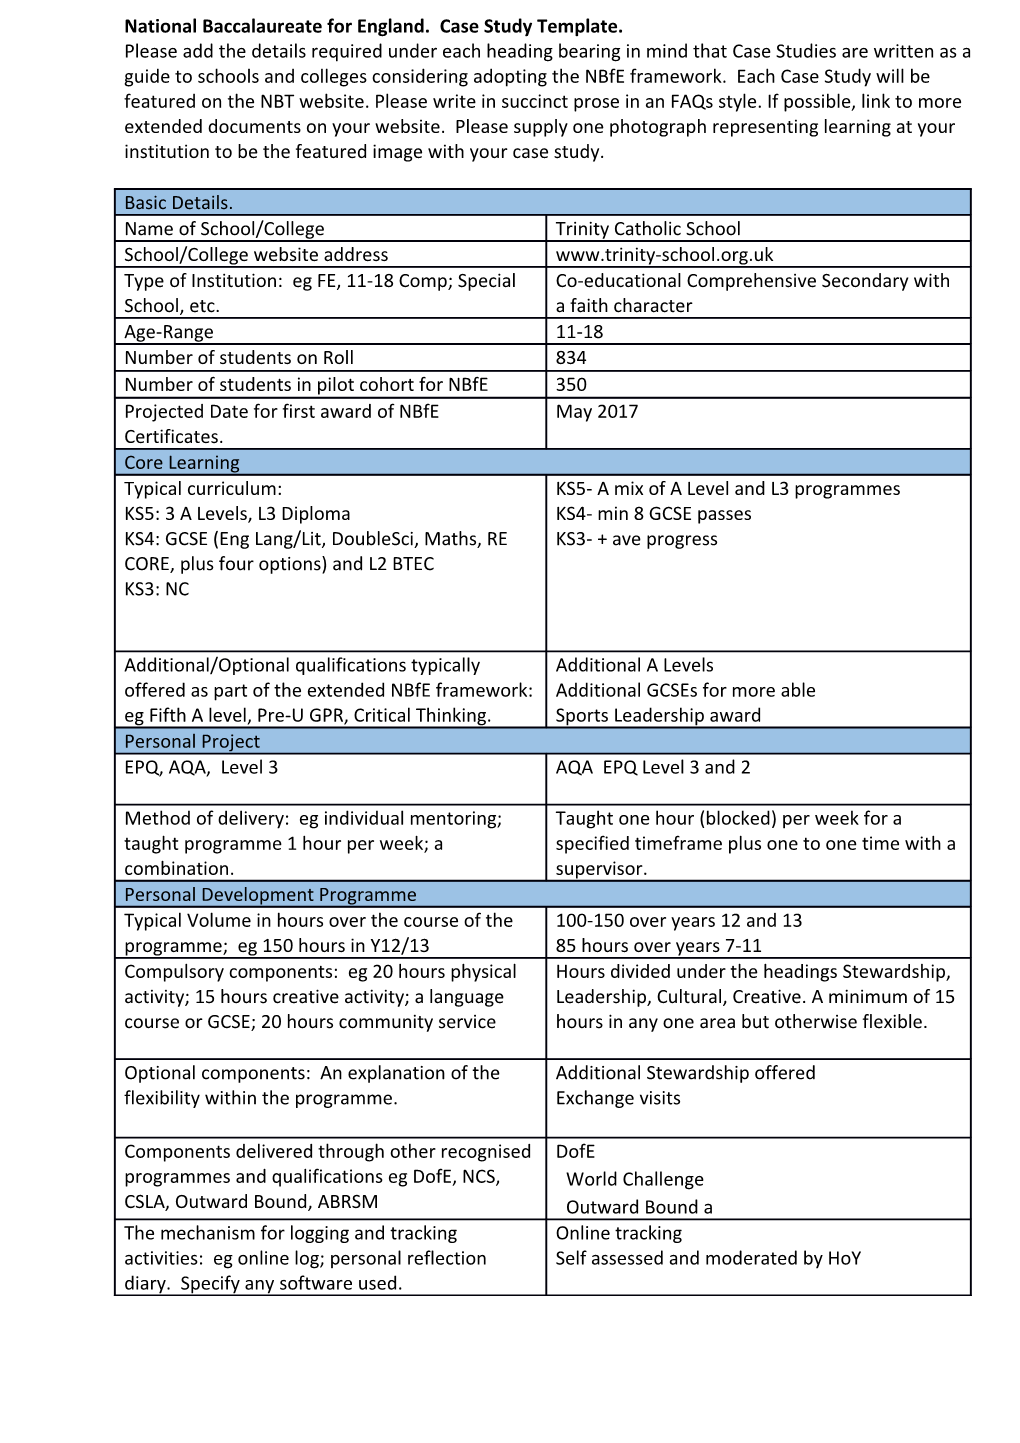 National Baccalaureate for England. Case Study Template